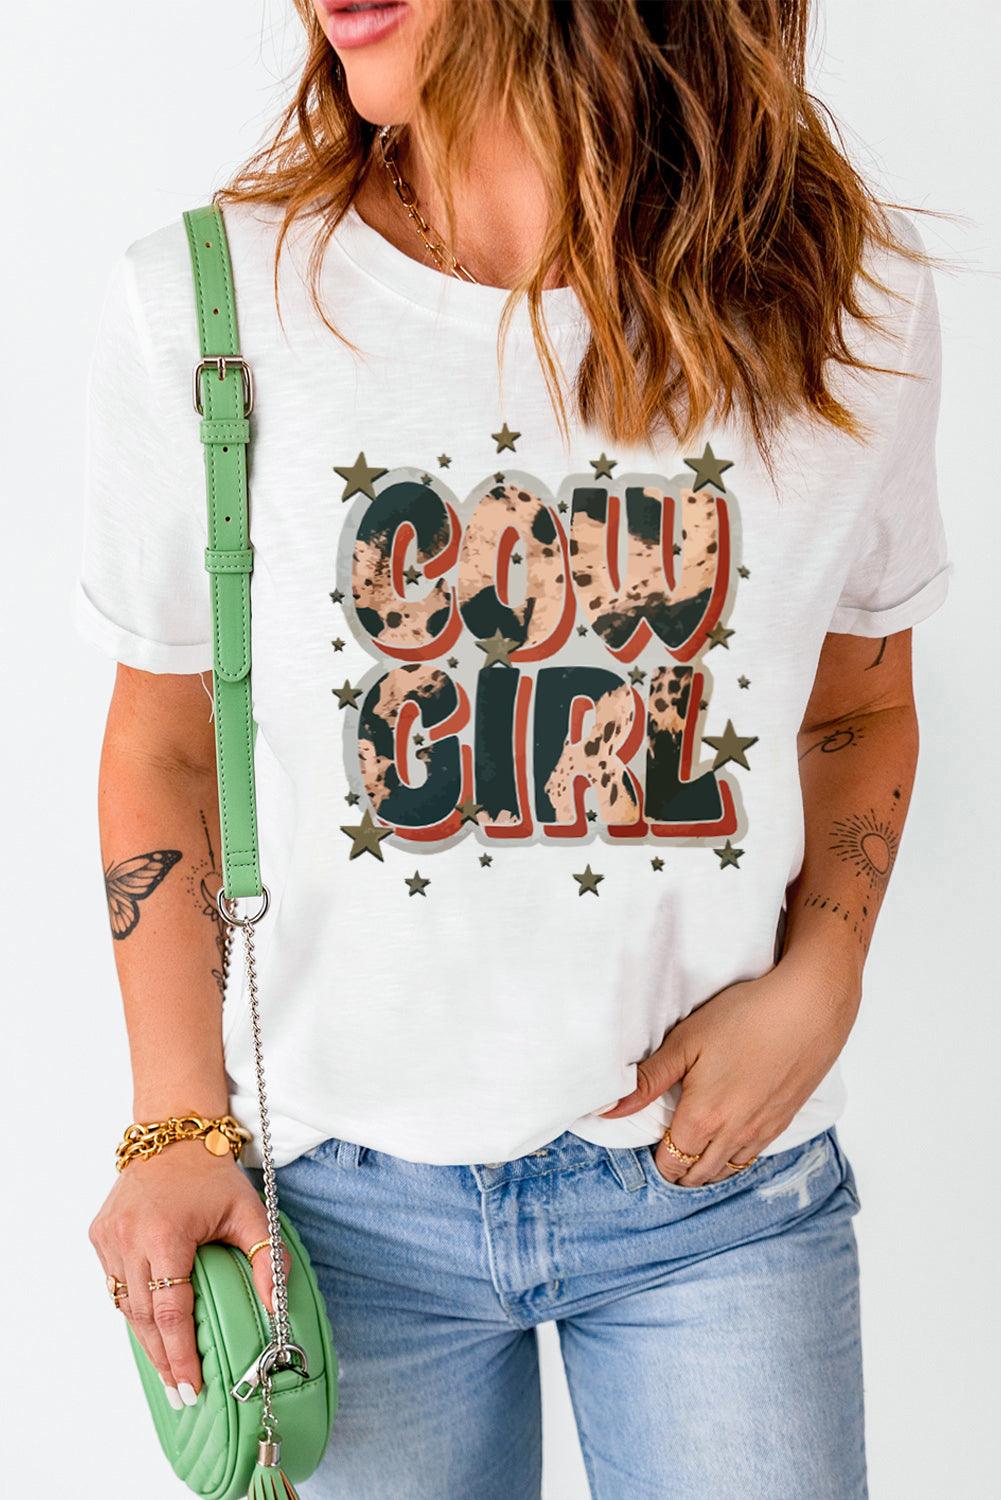 COWGIRL Graphic Tee Shirt - SteelBlue